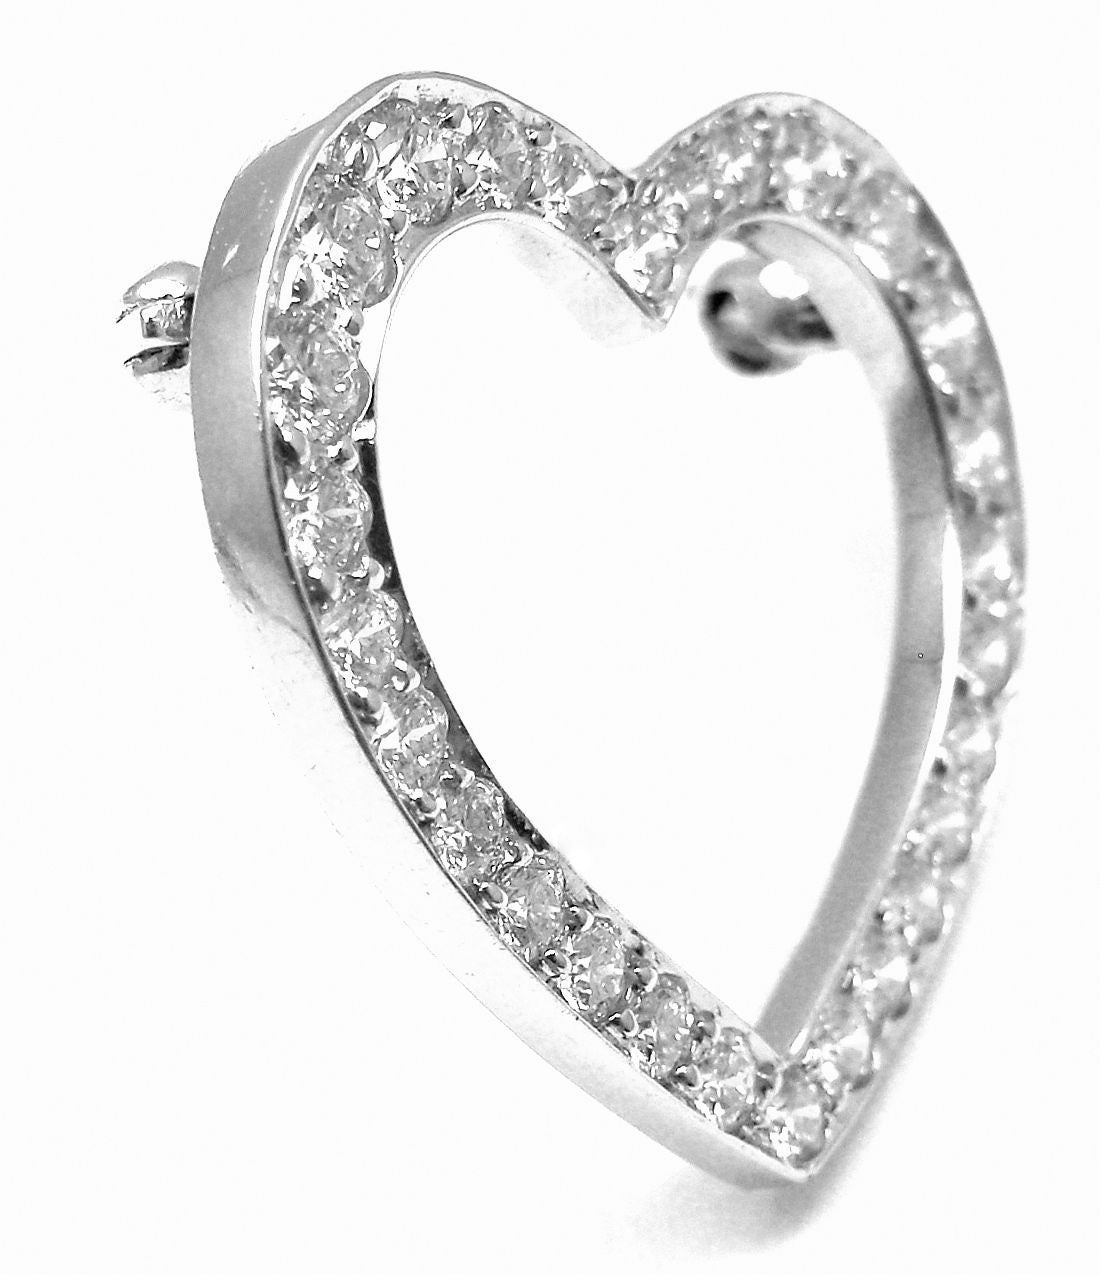 Platinum Tiffany & Co. Diamond Heart Brooch Pin.
With 29 round diamonds VS1 clarity, G color total weight approx. .80ct

Measurements: 24mm x 24mm
Weight: 5 grams
Stamped Hallmarks: Tiffany and Co PT950

*Shipping is Free inside the United